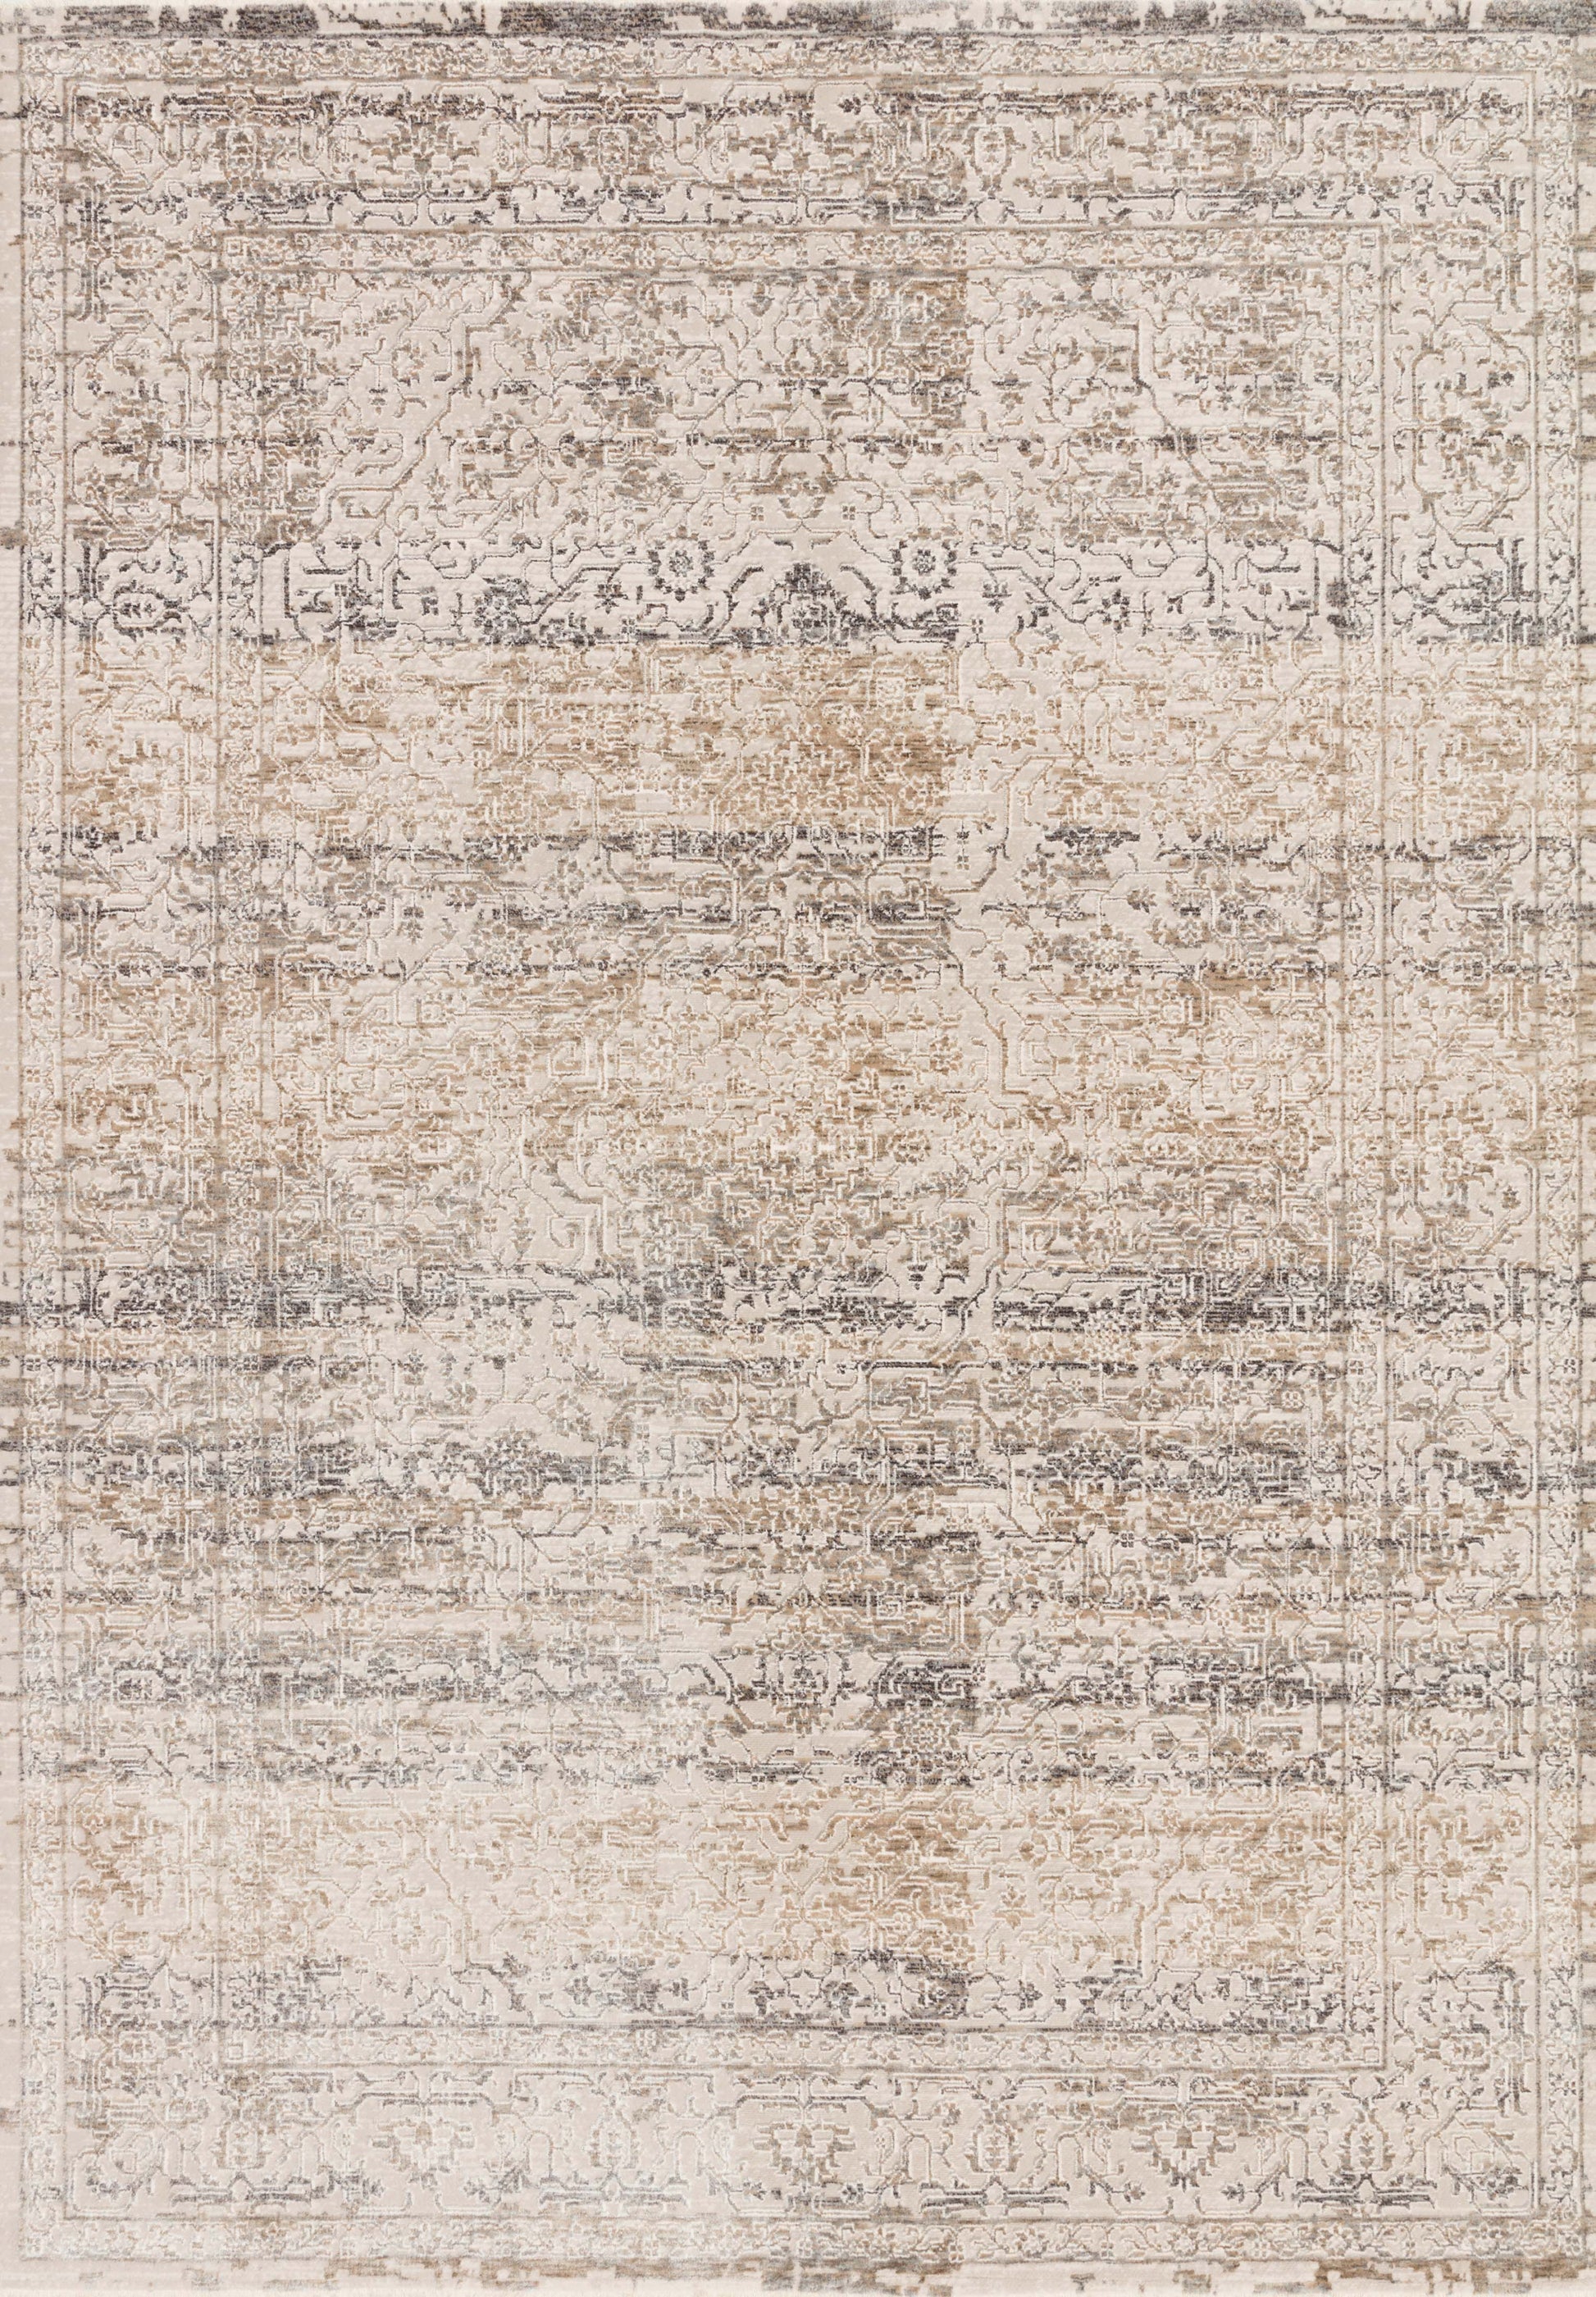 A picture of Loloi's Homage rug, in style HOM-02, color Beige / Grey